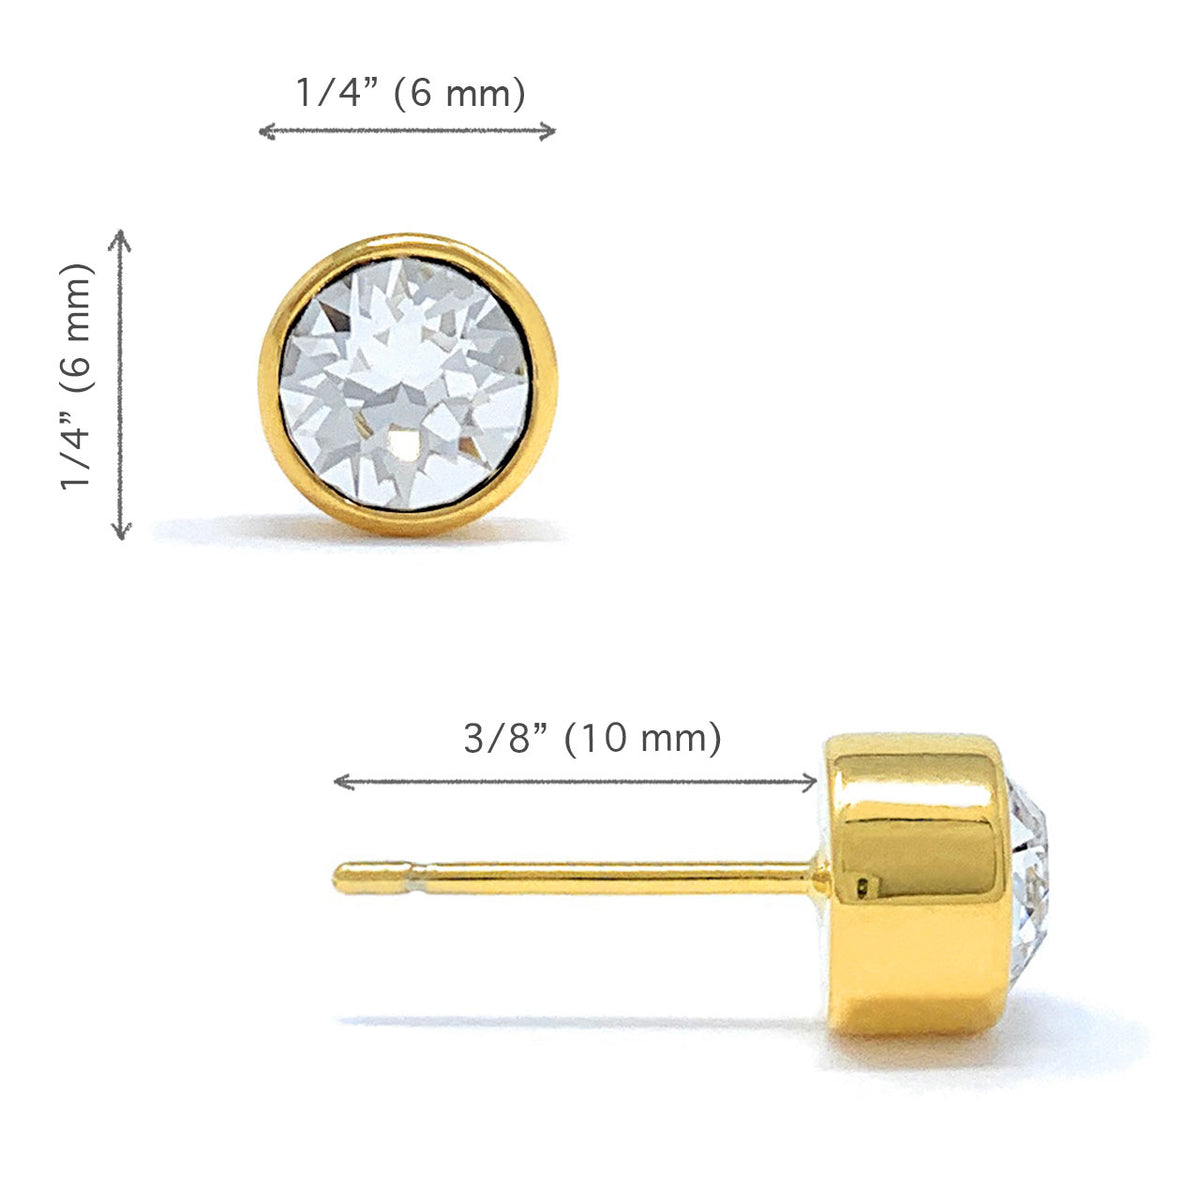 Harley Small Stud Earrings with White Clear Round Crystals from Swarovski Gold Plated - Ed Heart